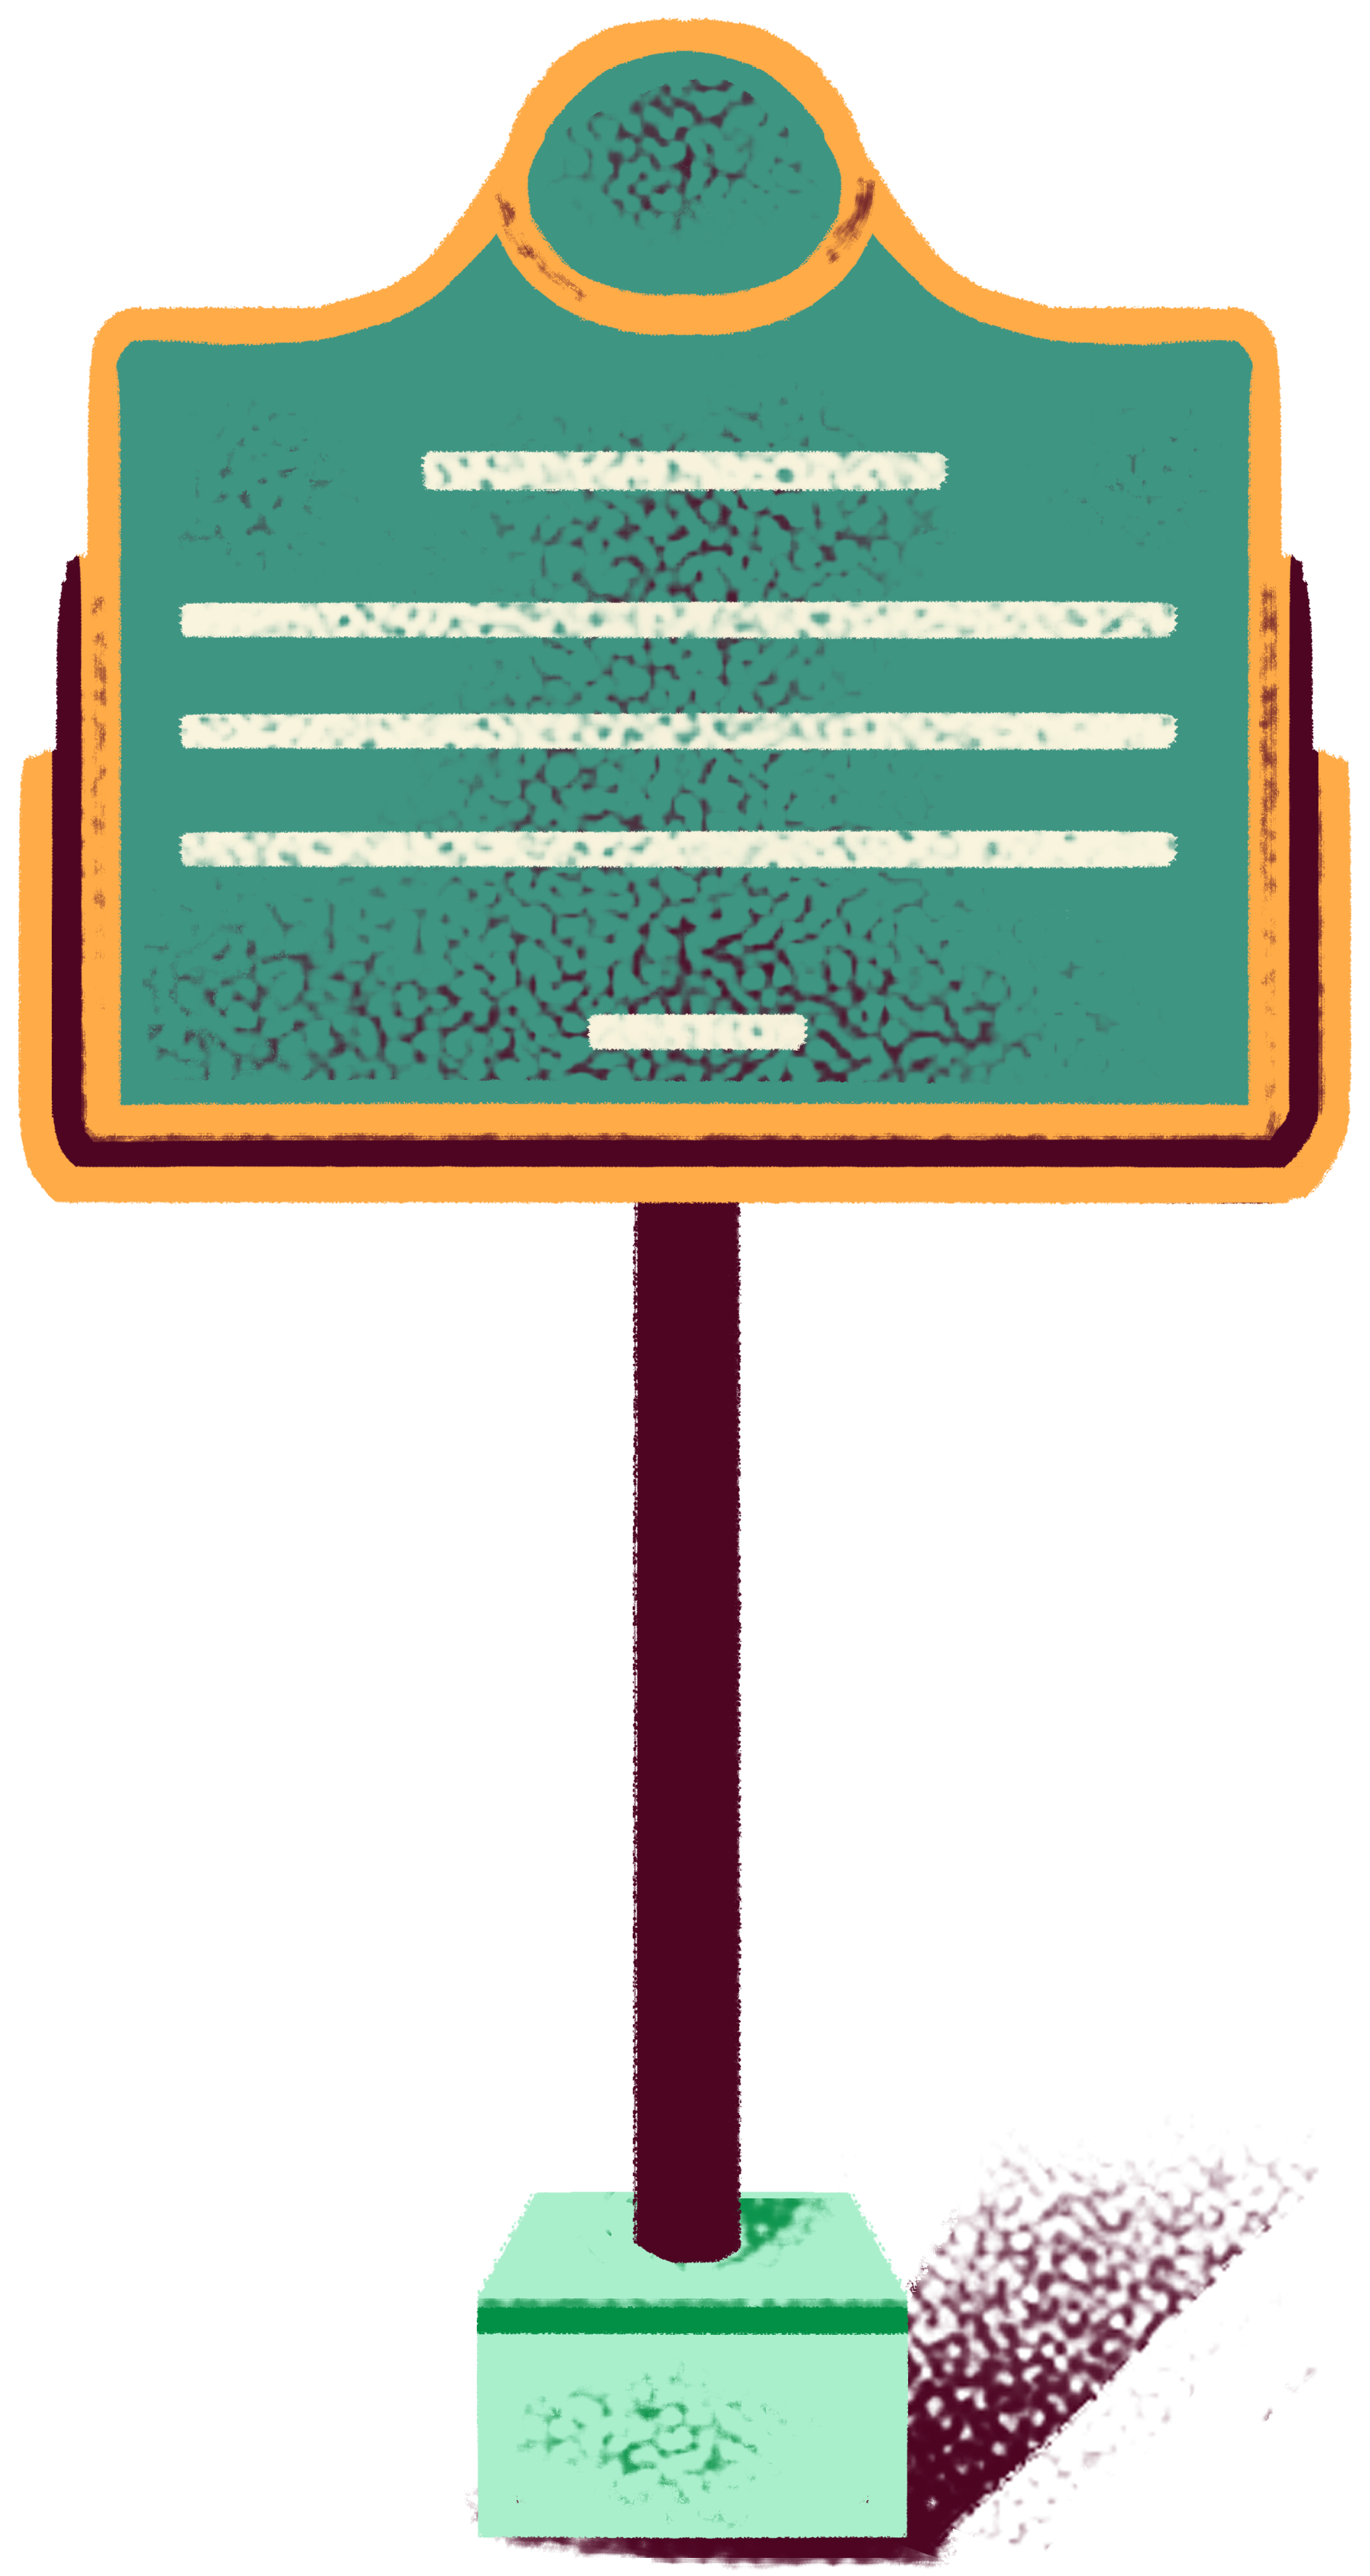 Illustration of a historic plaque sign on a post.